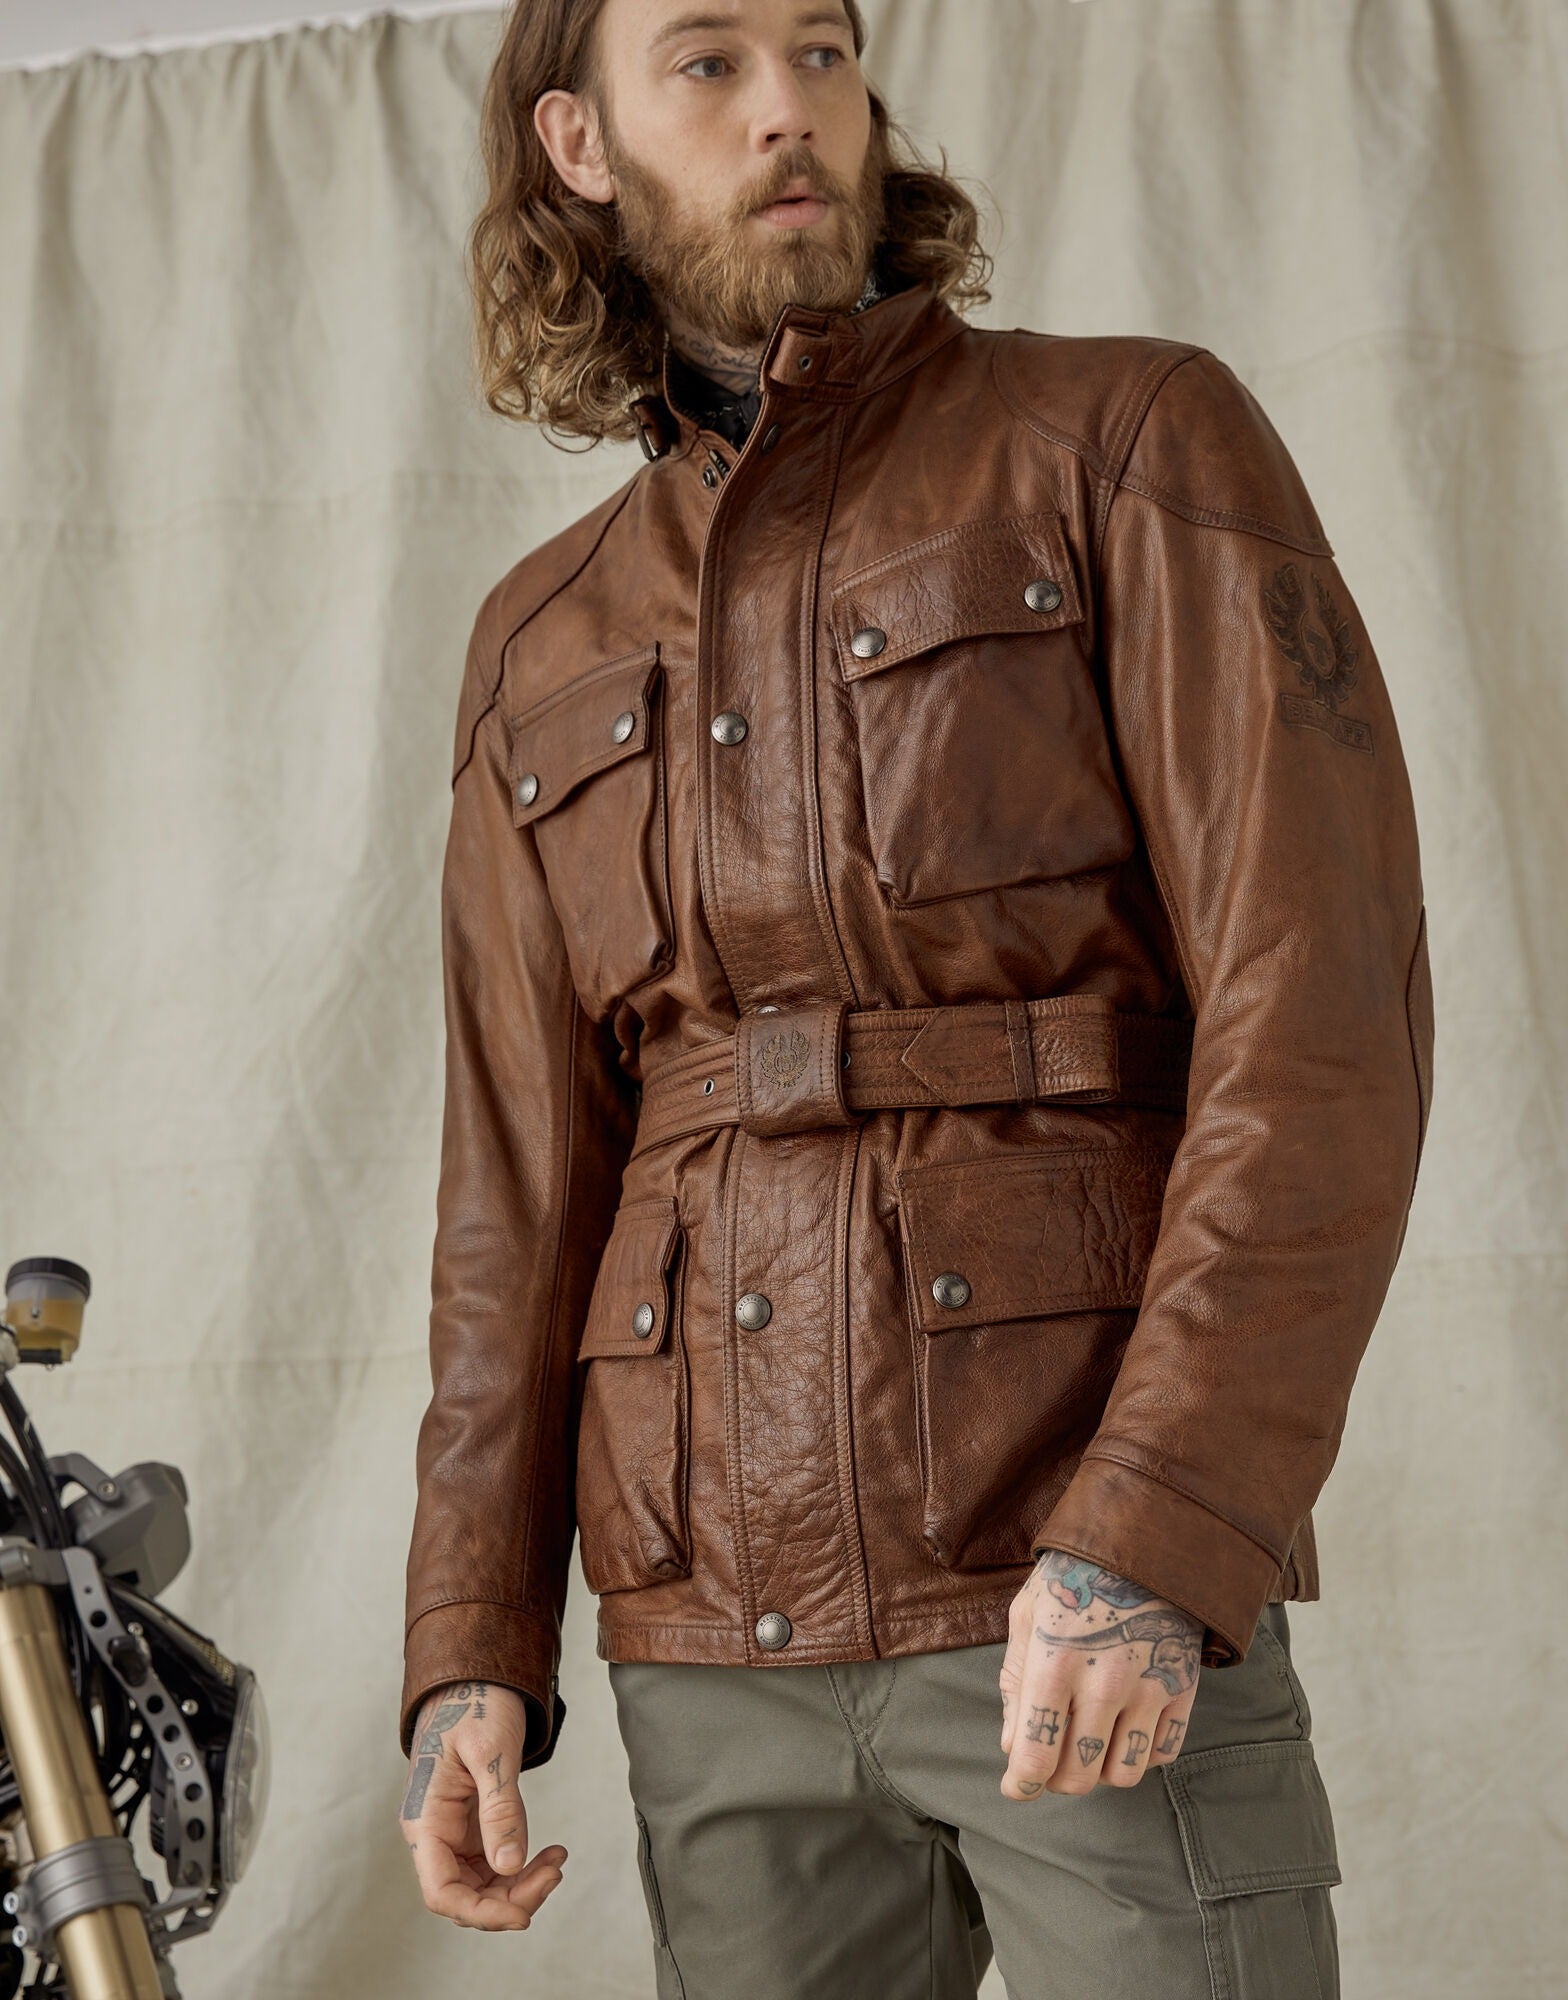 TRIALMASTER PRO LEATHER BIKER JACKET – The Iconic Leather